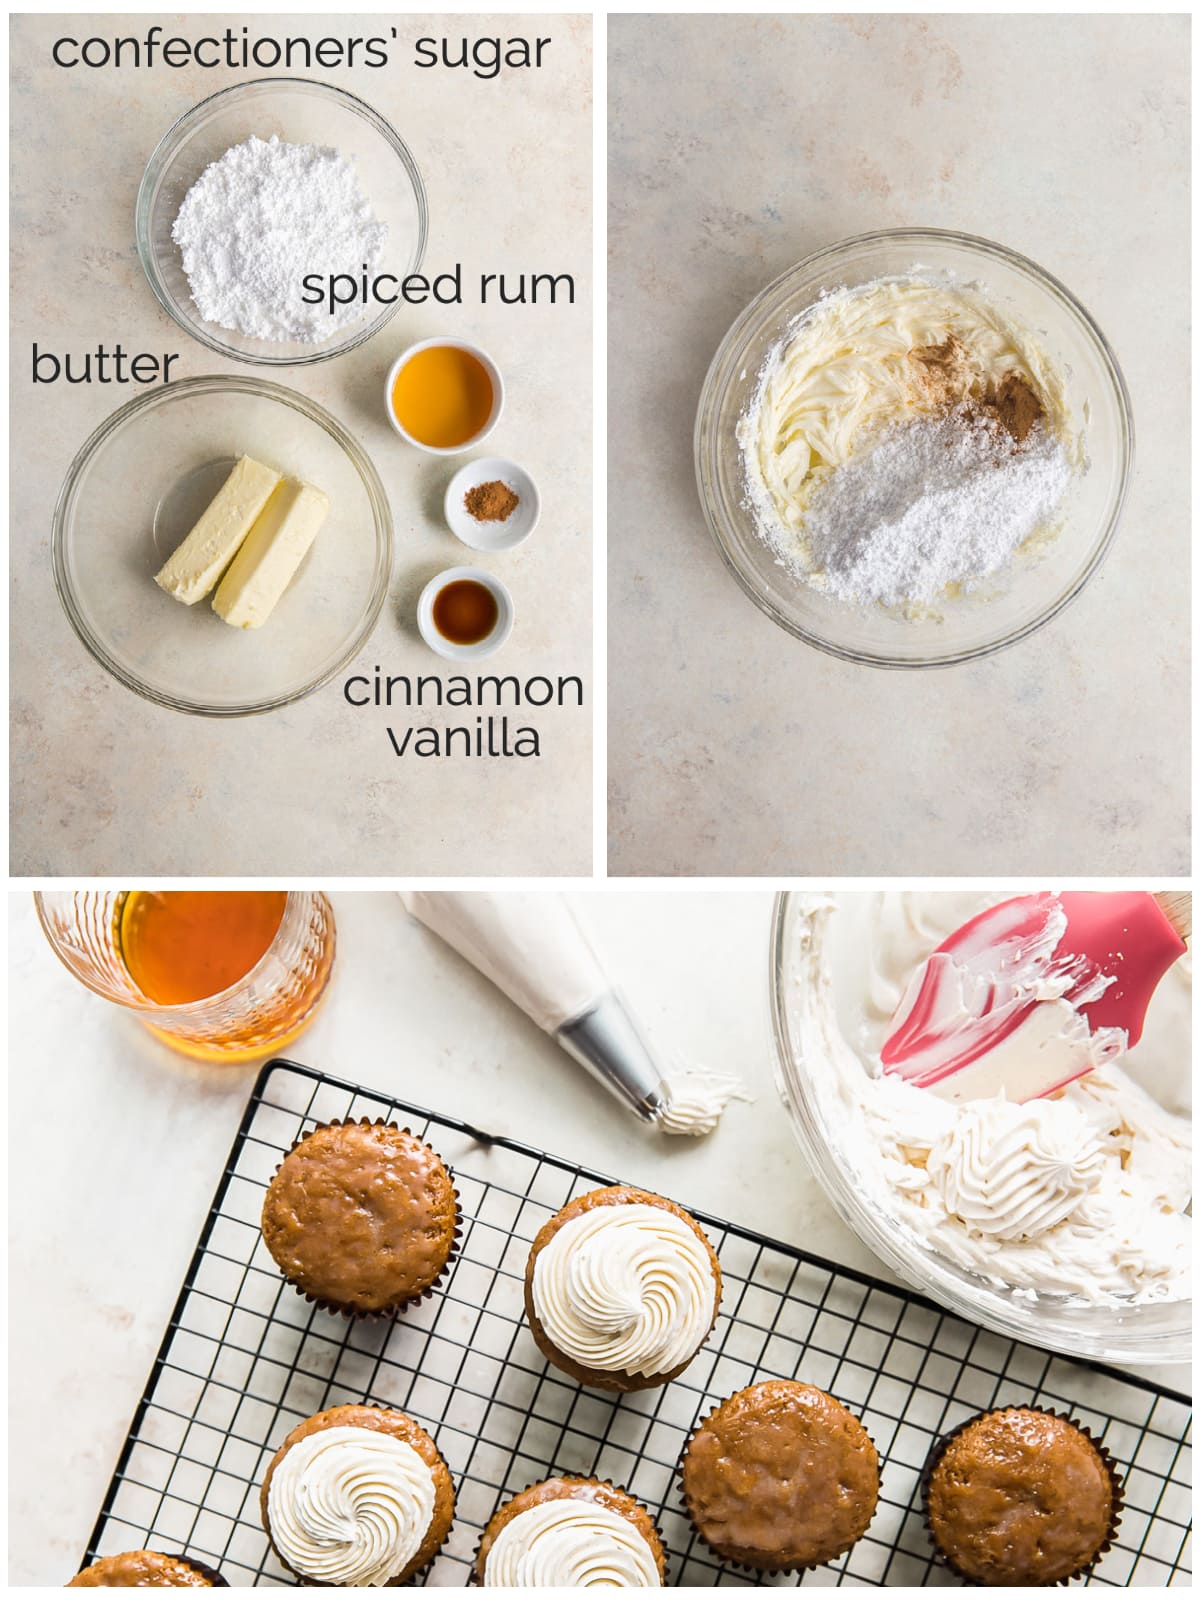 photo collage showing ingredients and steps to make rum buttercream frosting